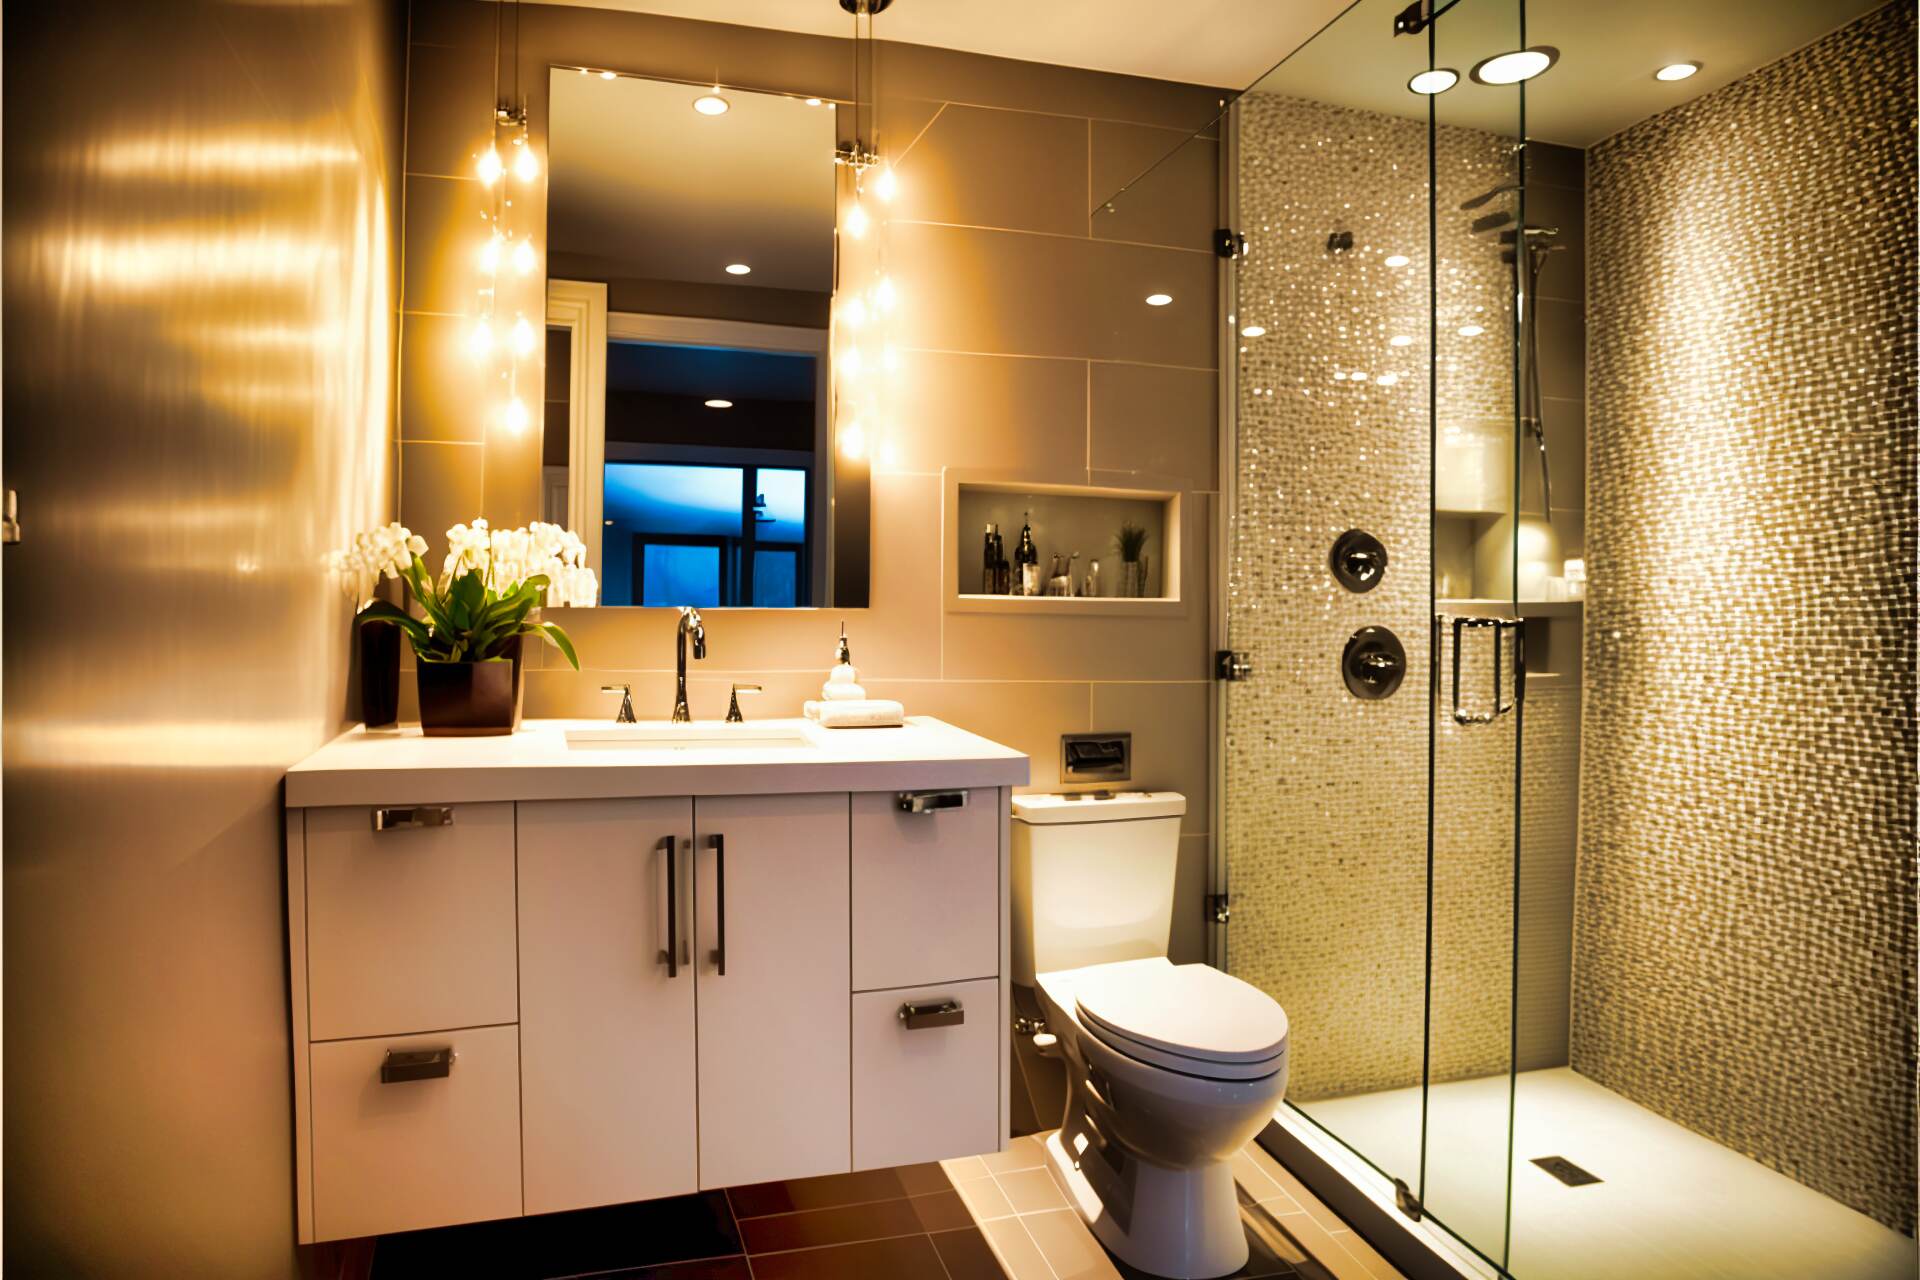 A Modern Bathroom With A Glamorous Aesthetic. The Space Features A Floating Vanity With A White Sink And A Large Mirror. The Shower Has A Glass Partition And A Rainfall Showerhead. The Floors Are A Light Wood-Look Tile, And The Walls Are White Subway Tile With A Mix Of Glass Mosaic Accents. The Room Is Illuminated By Recessed Lighting And A Large Crystal Chandelier.